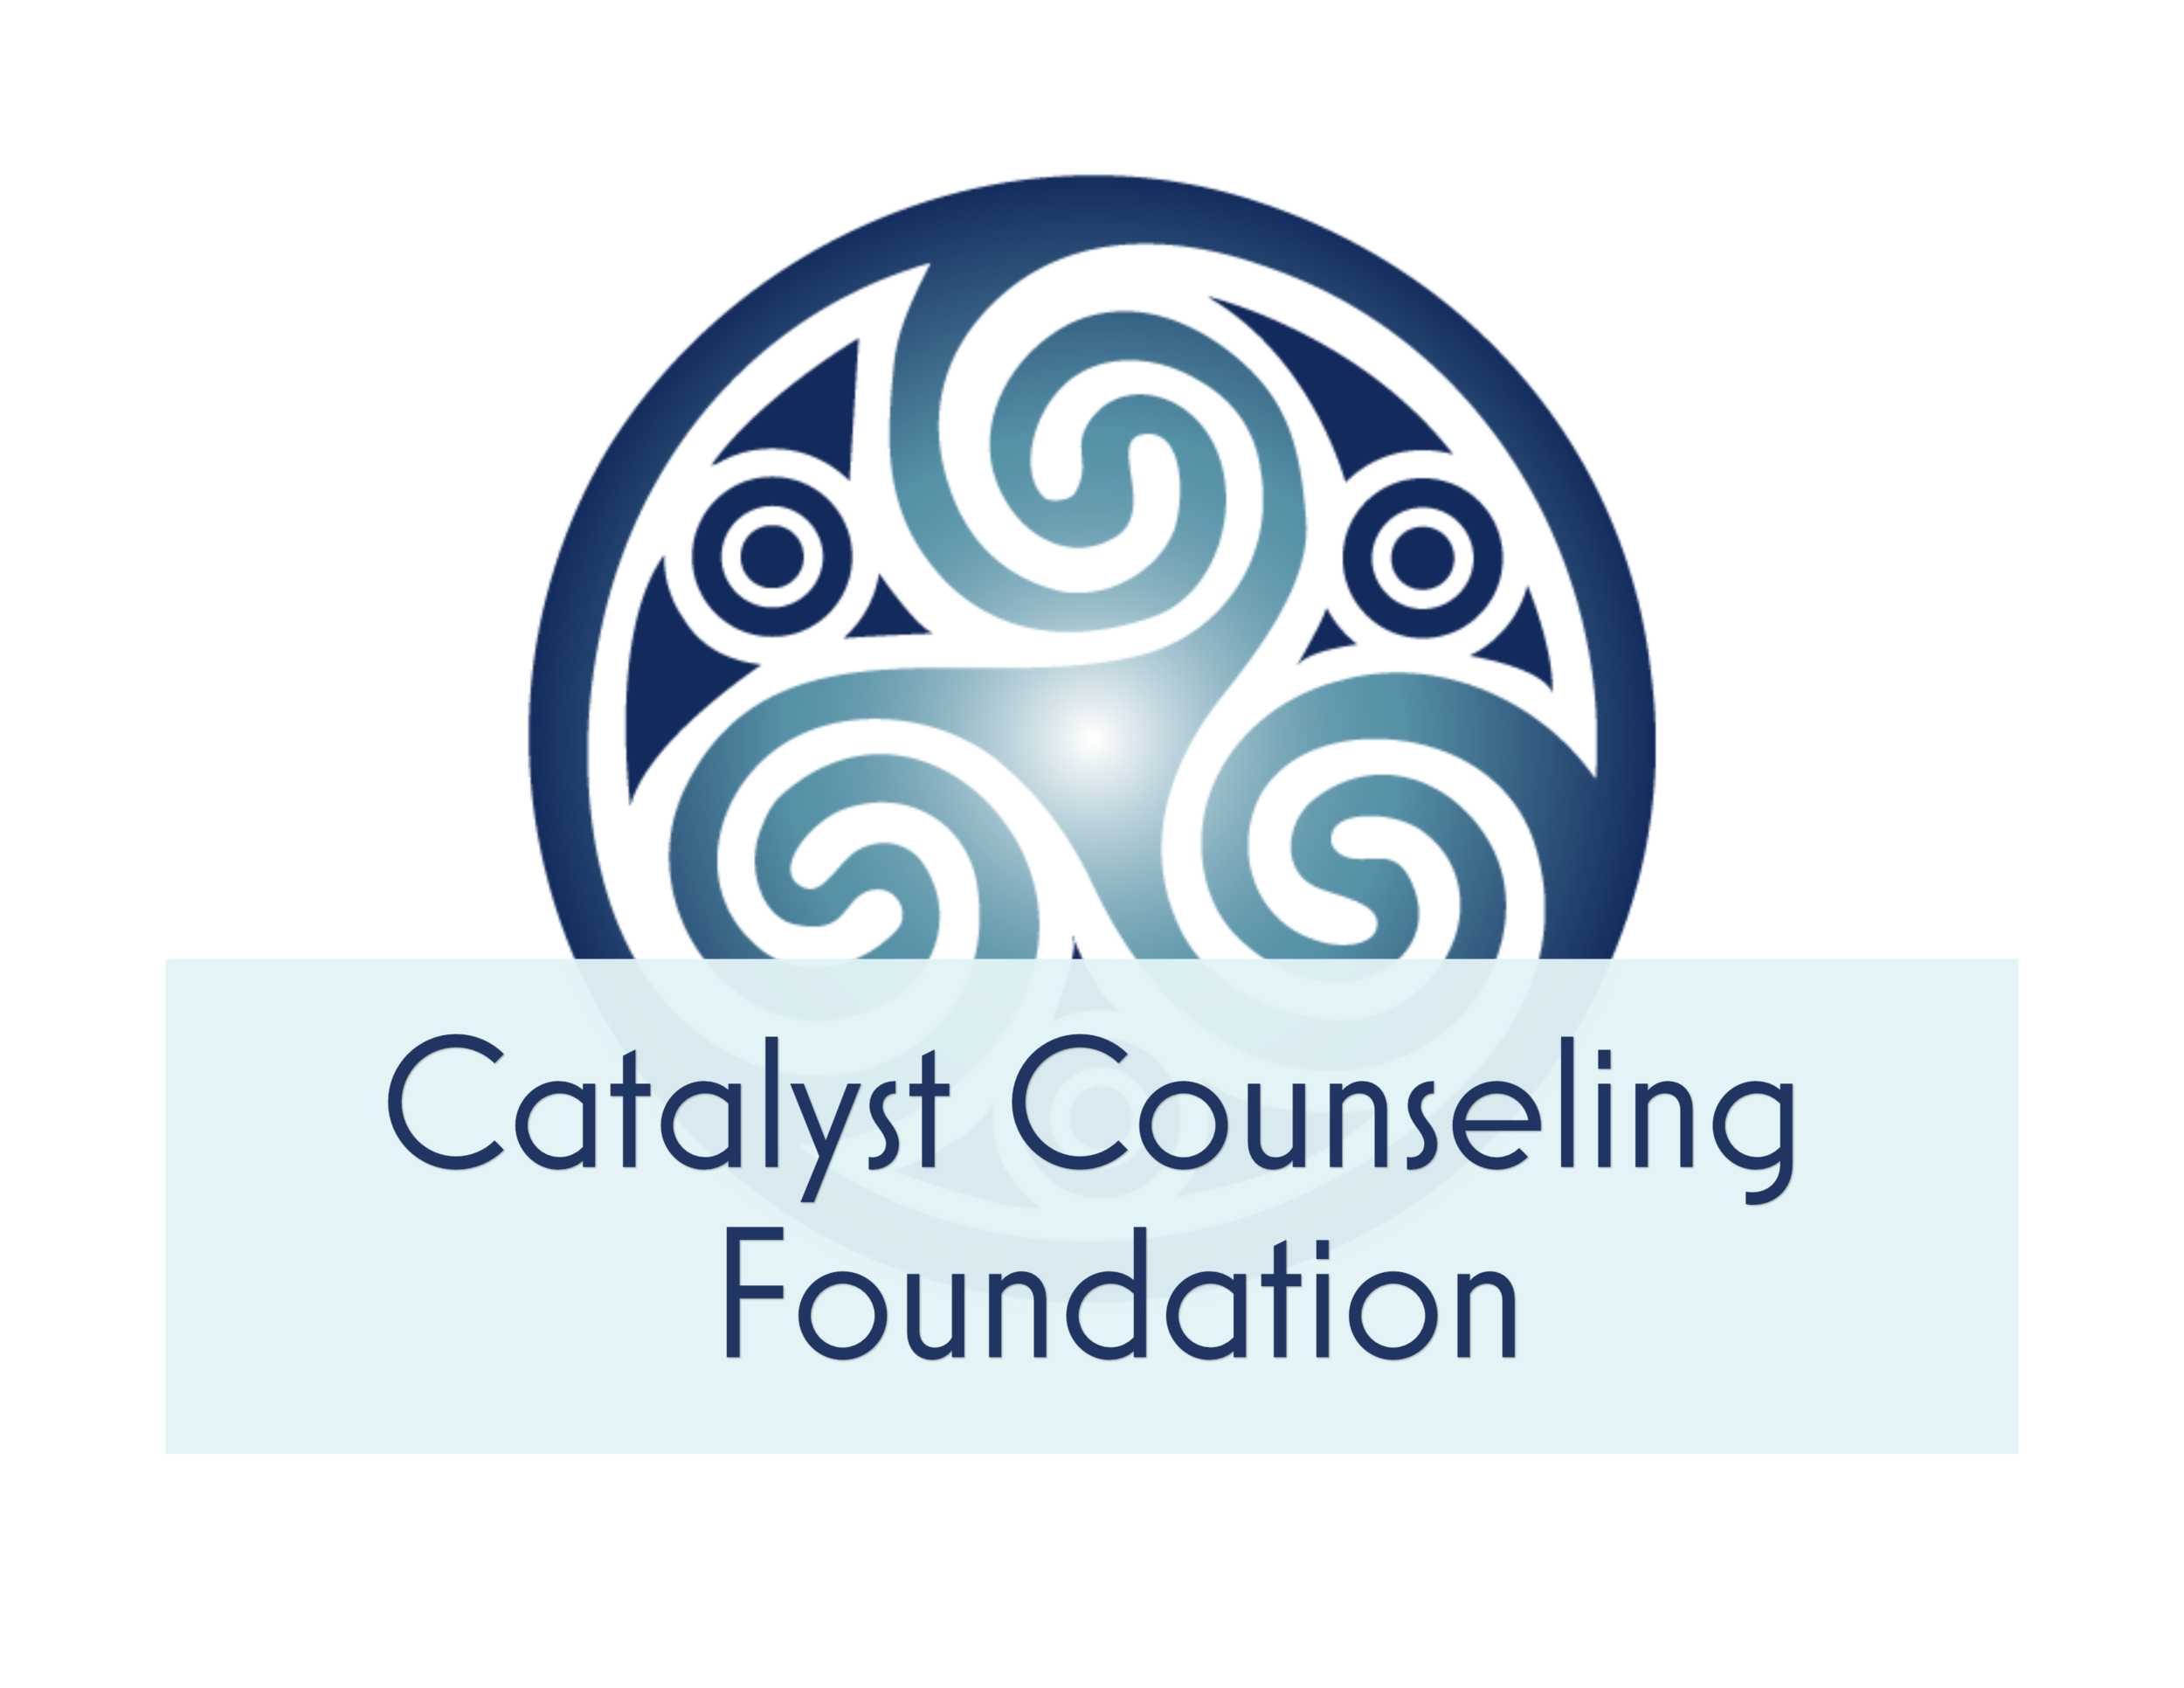 Catalyst Counseling Foundation